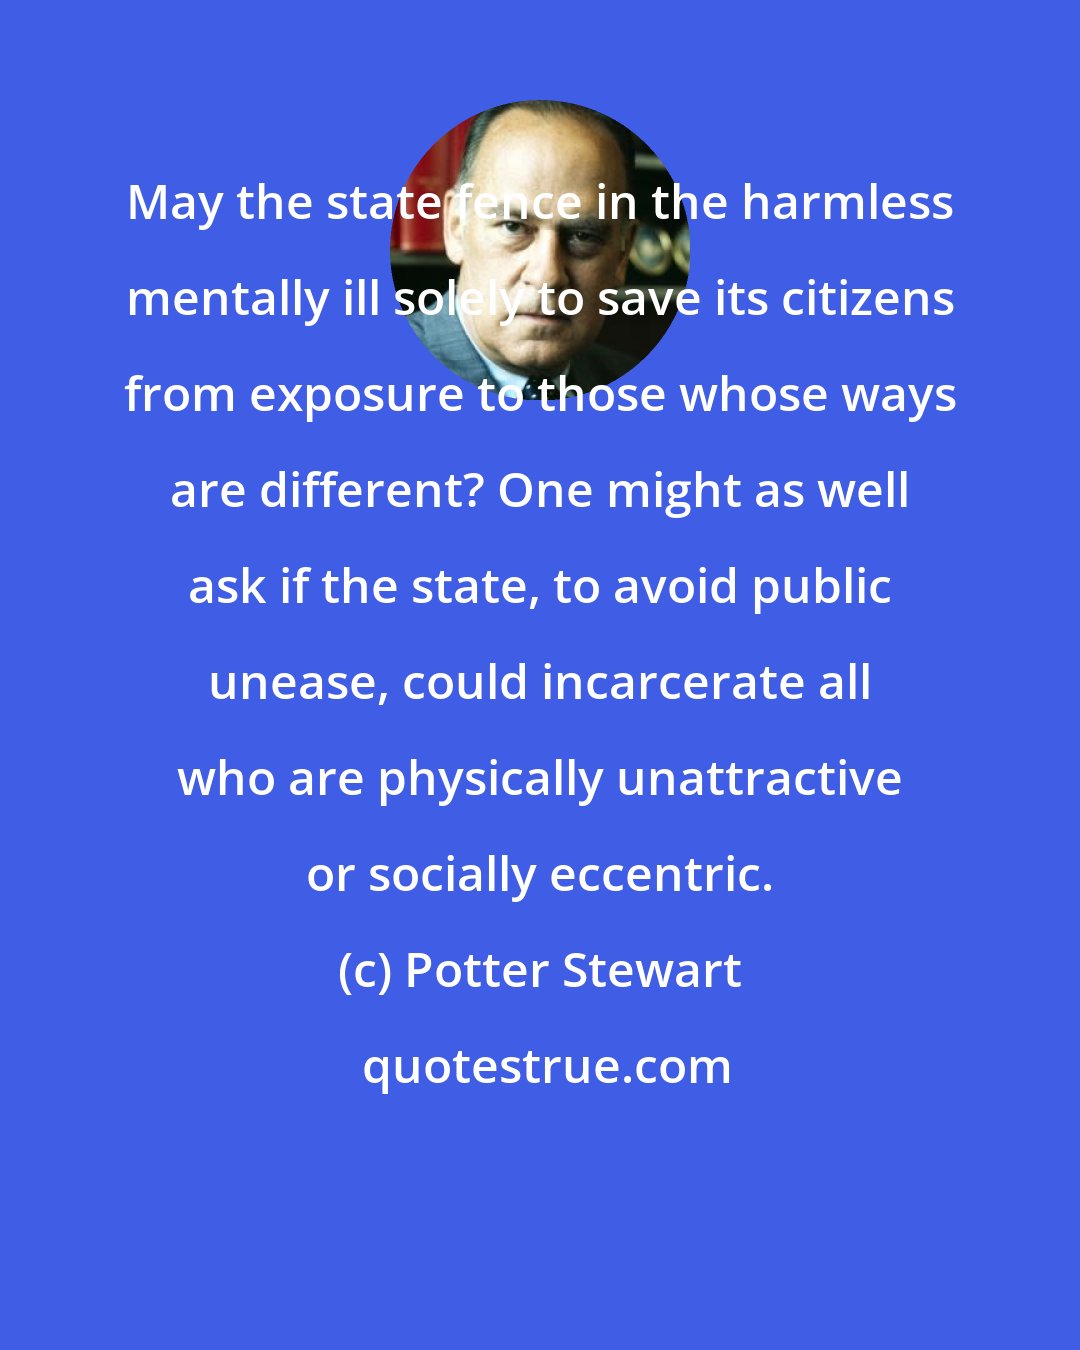 Potter Stewart: May the state fence in the harmless mentally ill solely to save its citizens from exposure to those whose ways are different? One might as well ask if the state, to avoid public unease, could incarcerate all who are physically unattractive or socially eccentric.